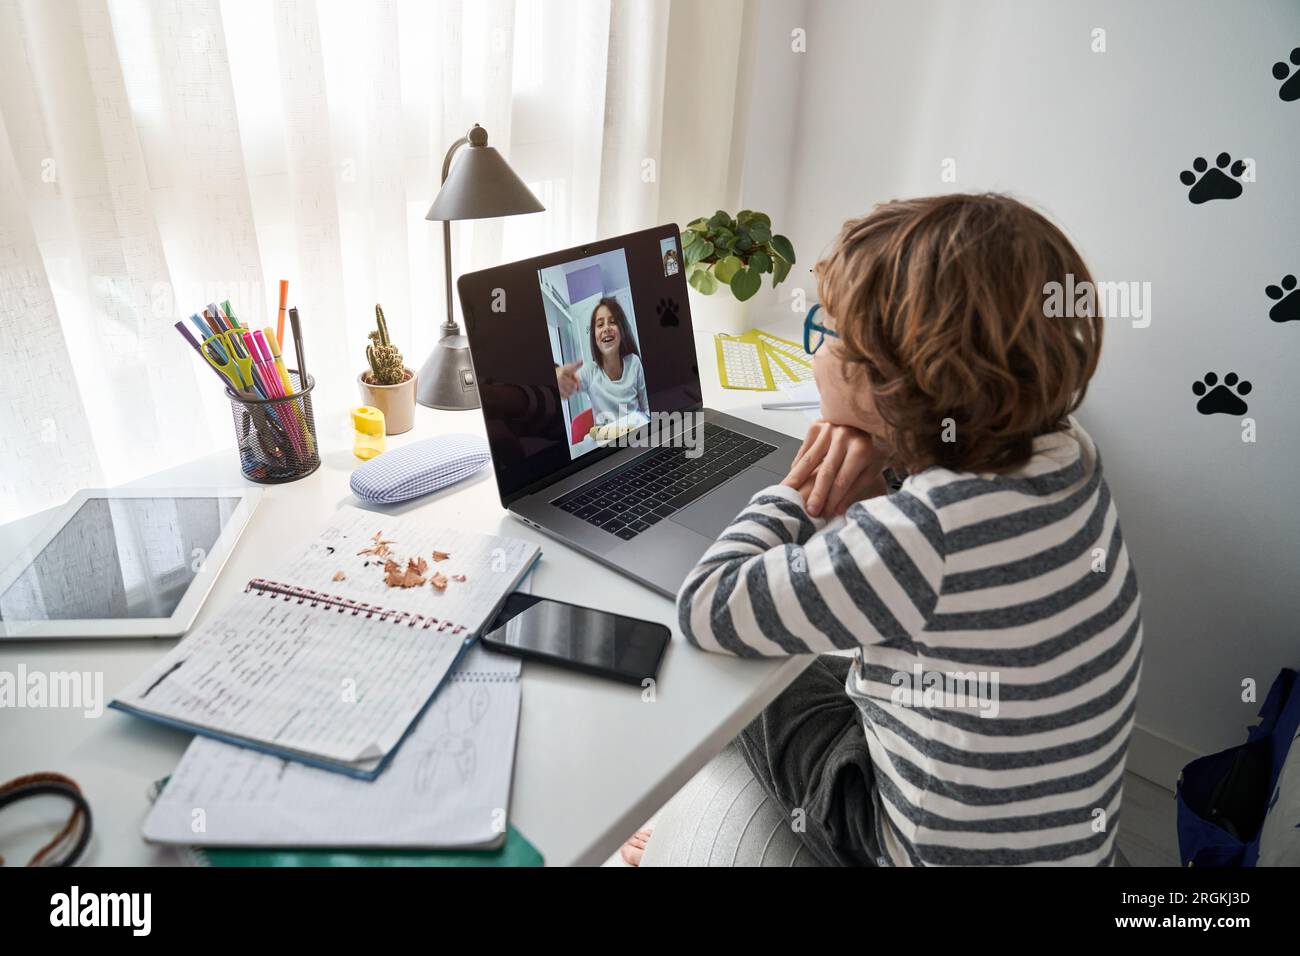 Side view of preteen boy with curly hair sitting at table and having video chat with friend via netbook while doing homework in room Stock Photo